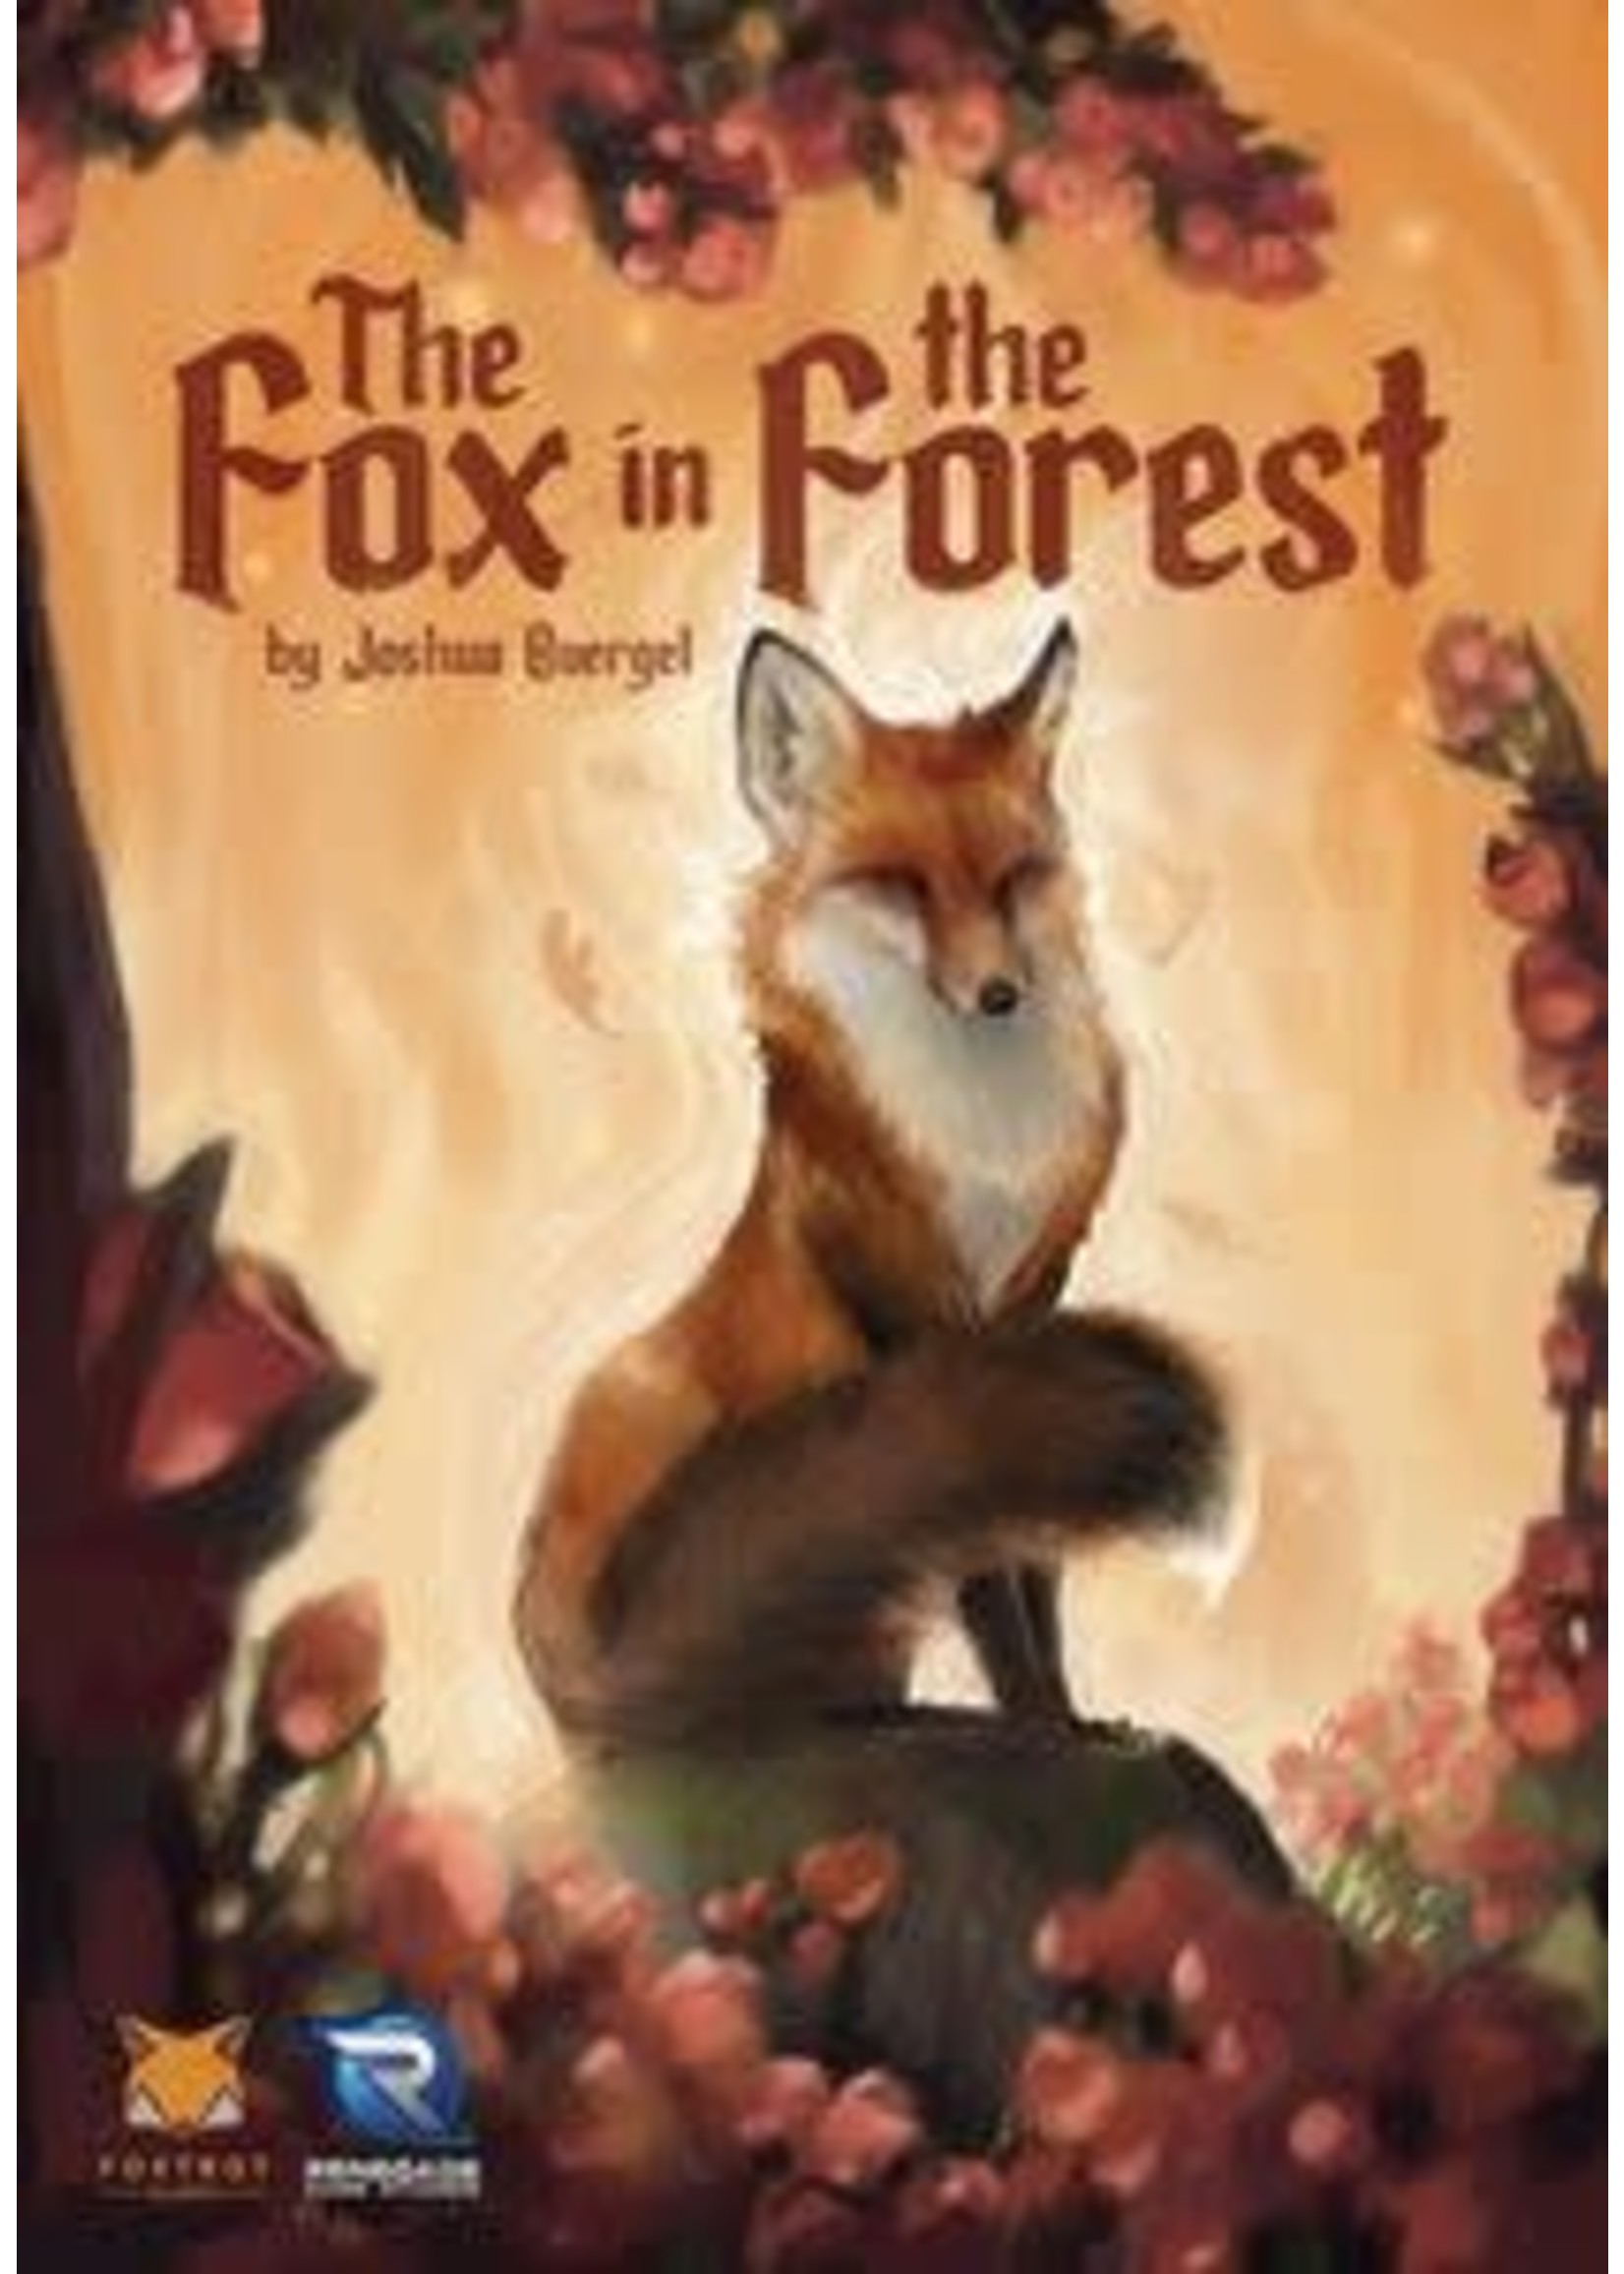 Rental RENTAL - The Fox in the Forest 5.6 oz